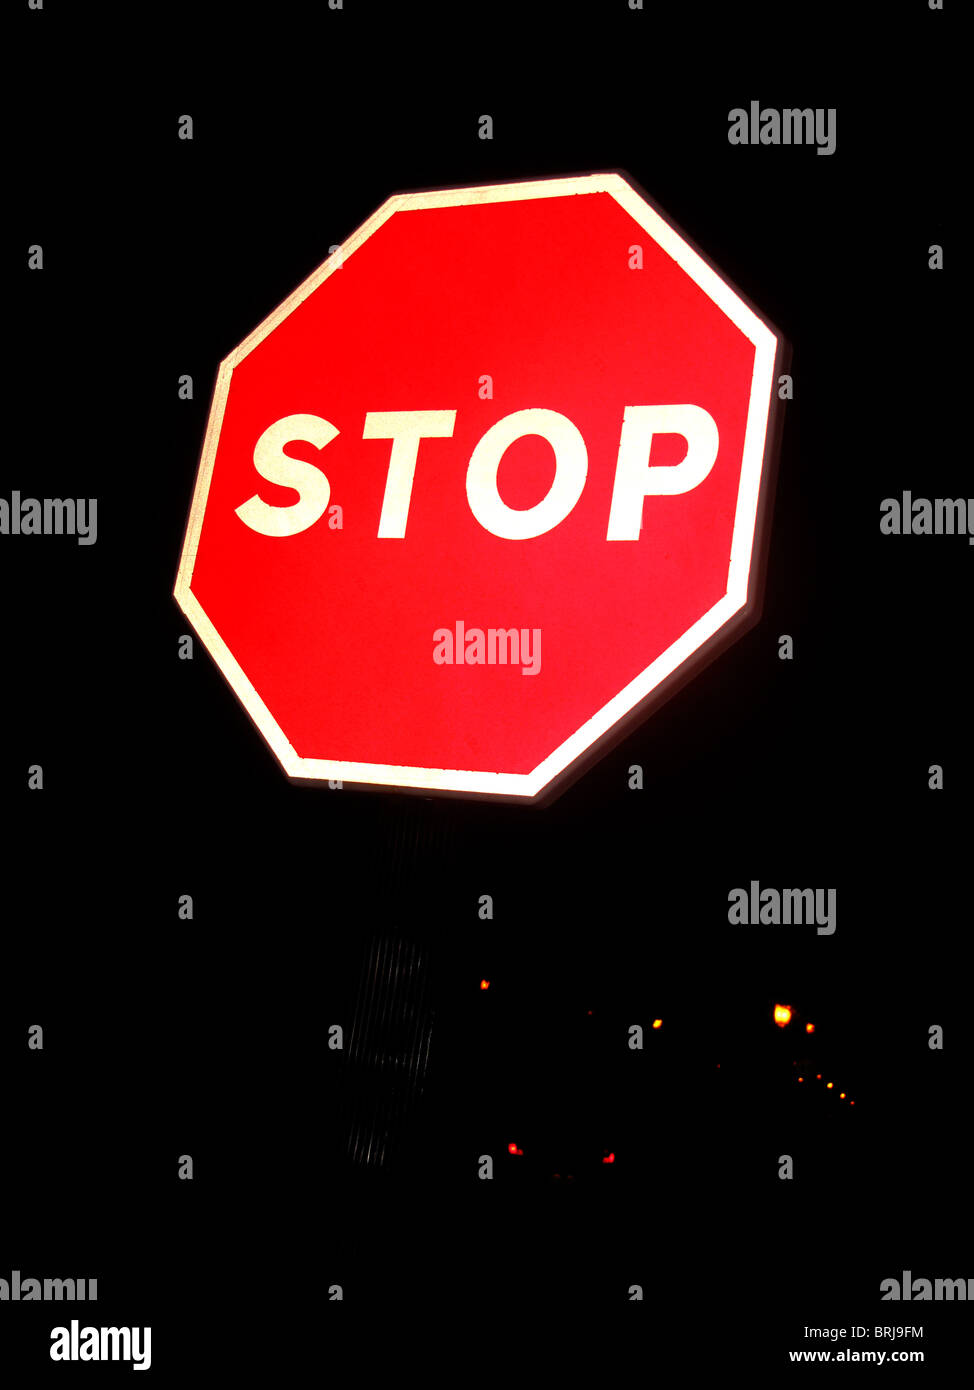 Octagonal red stop sign against dark background Stock Photo